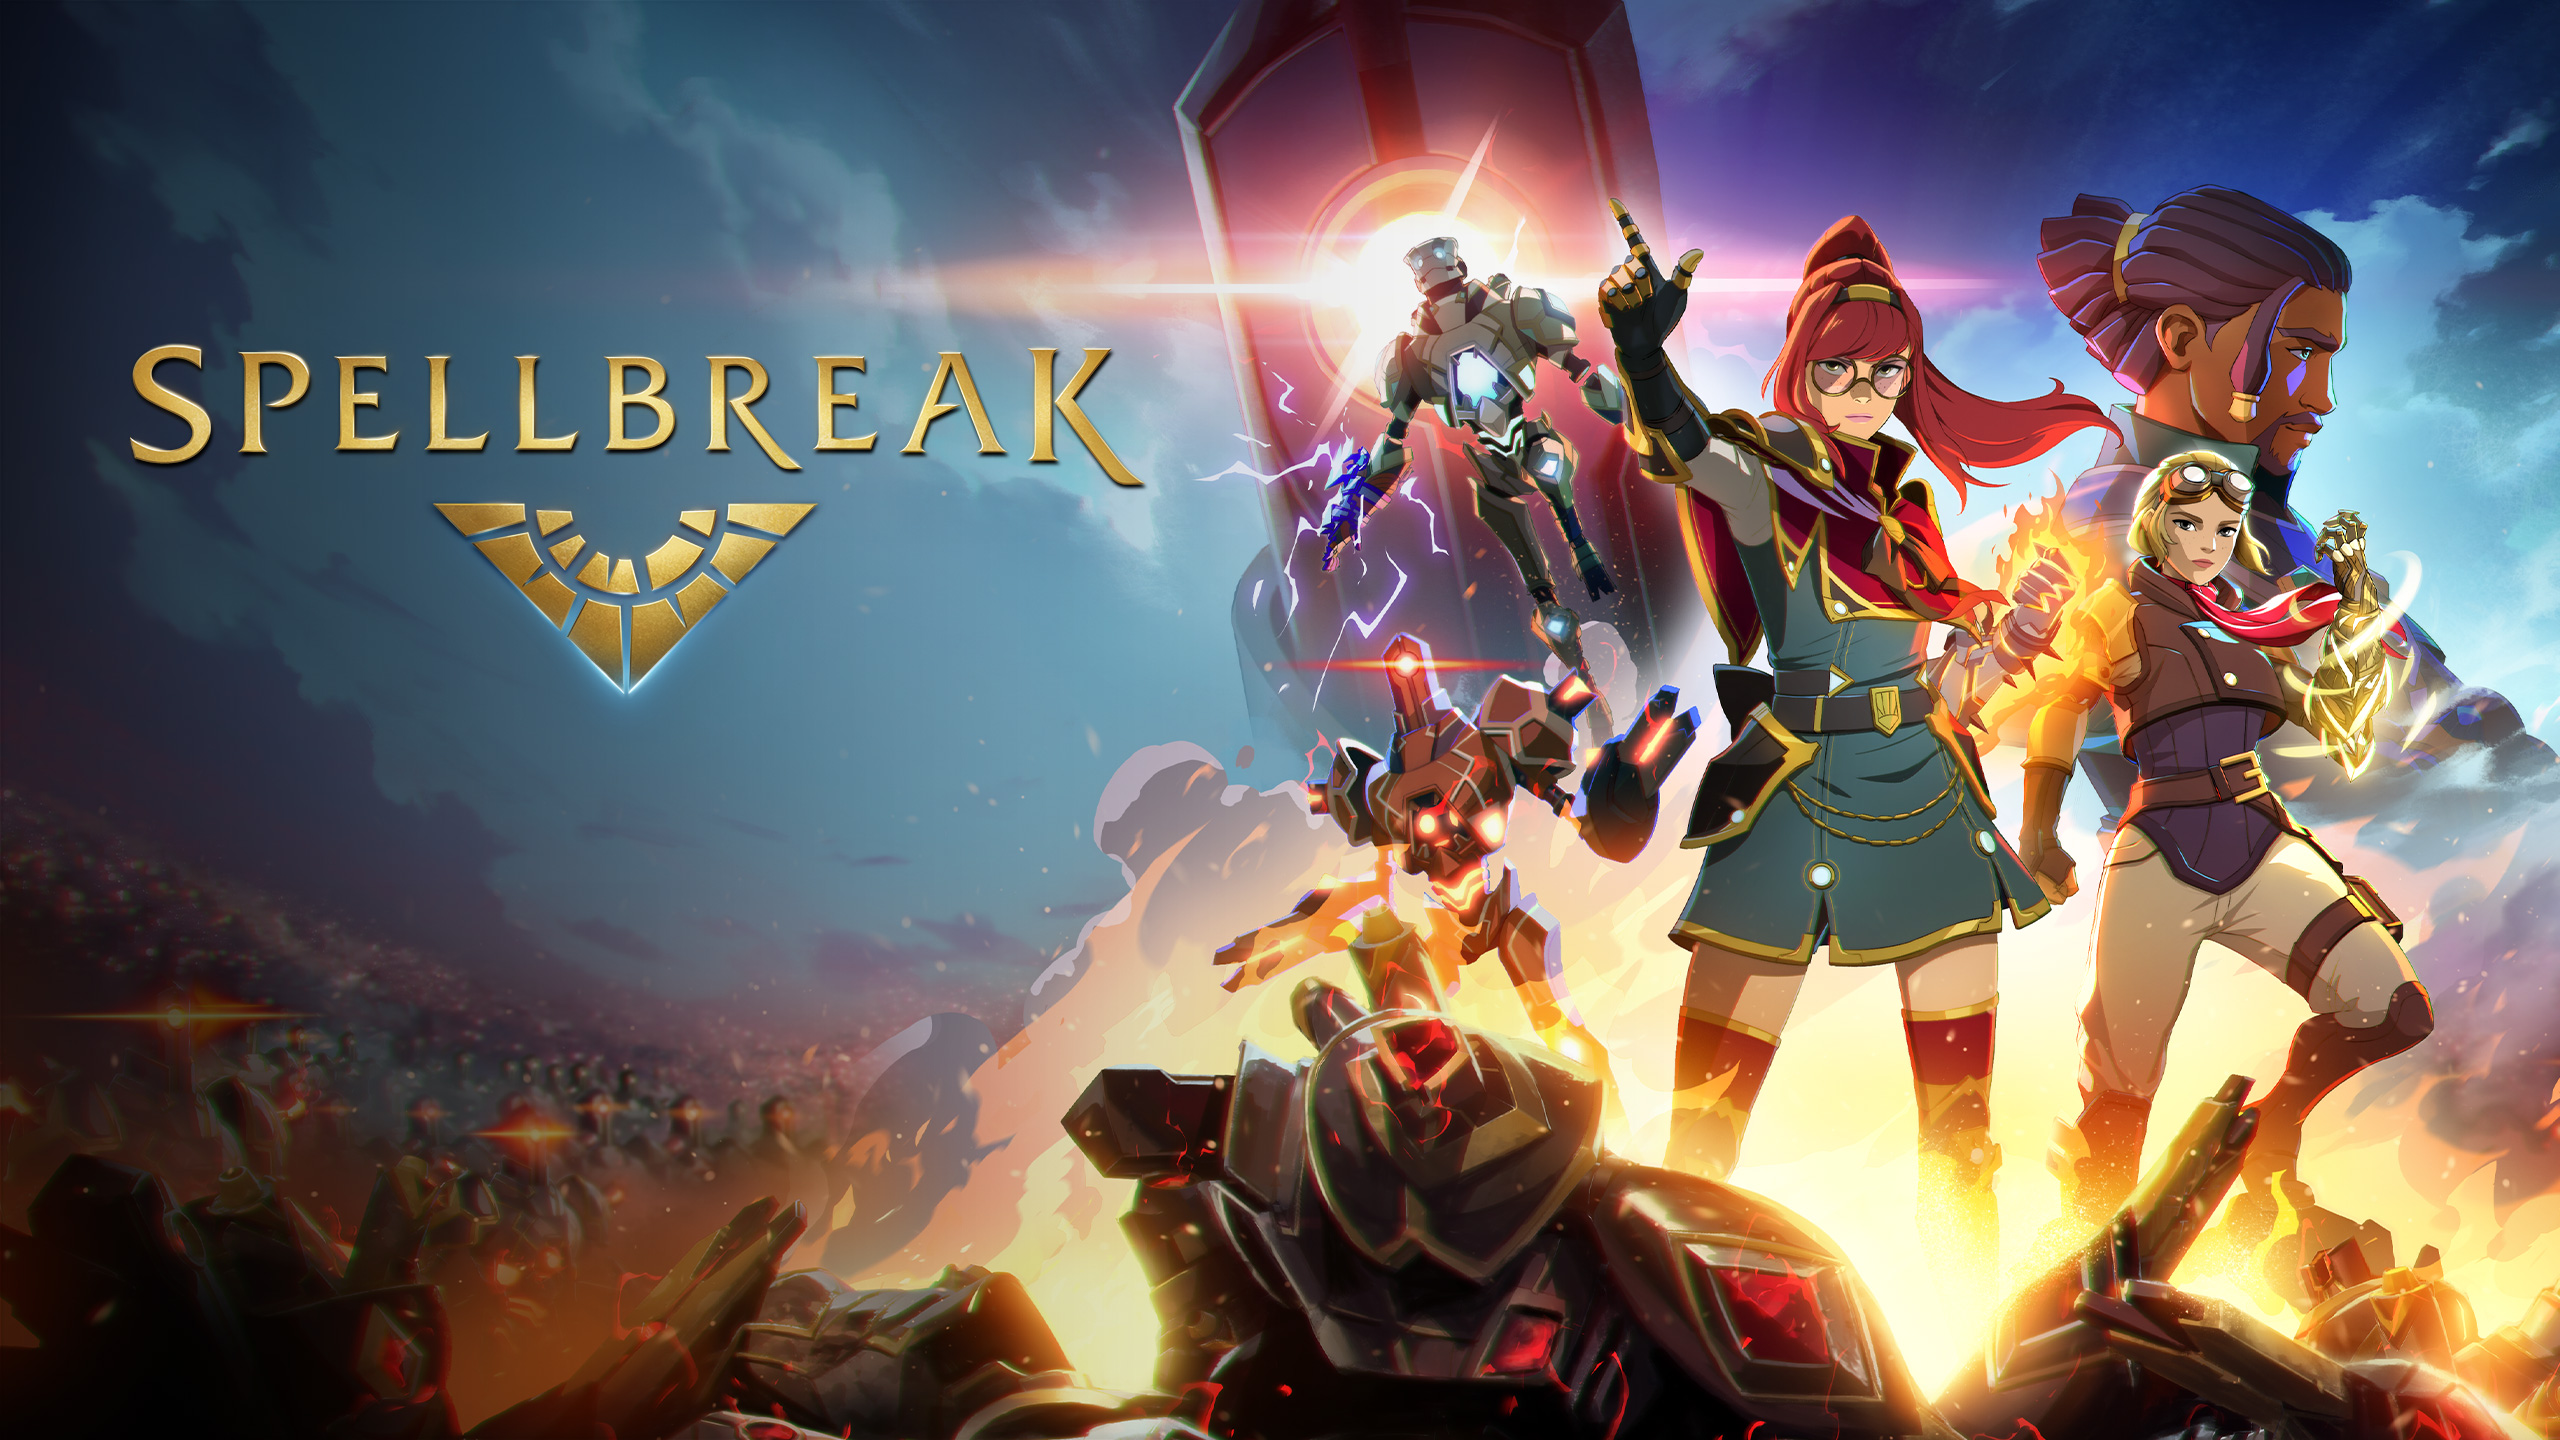 The fantasy royal battle of Spellbreak will be close in early 2023